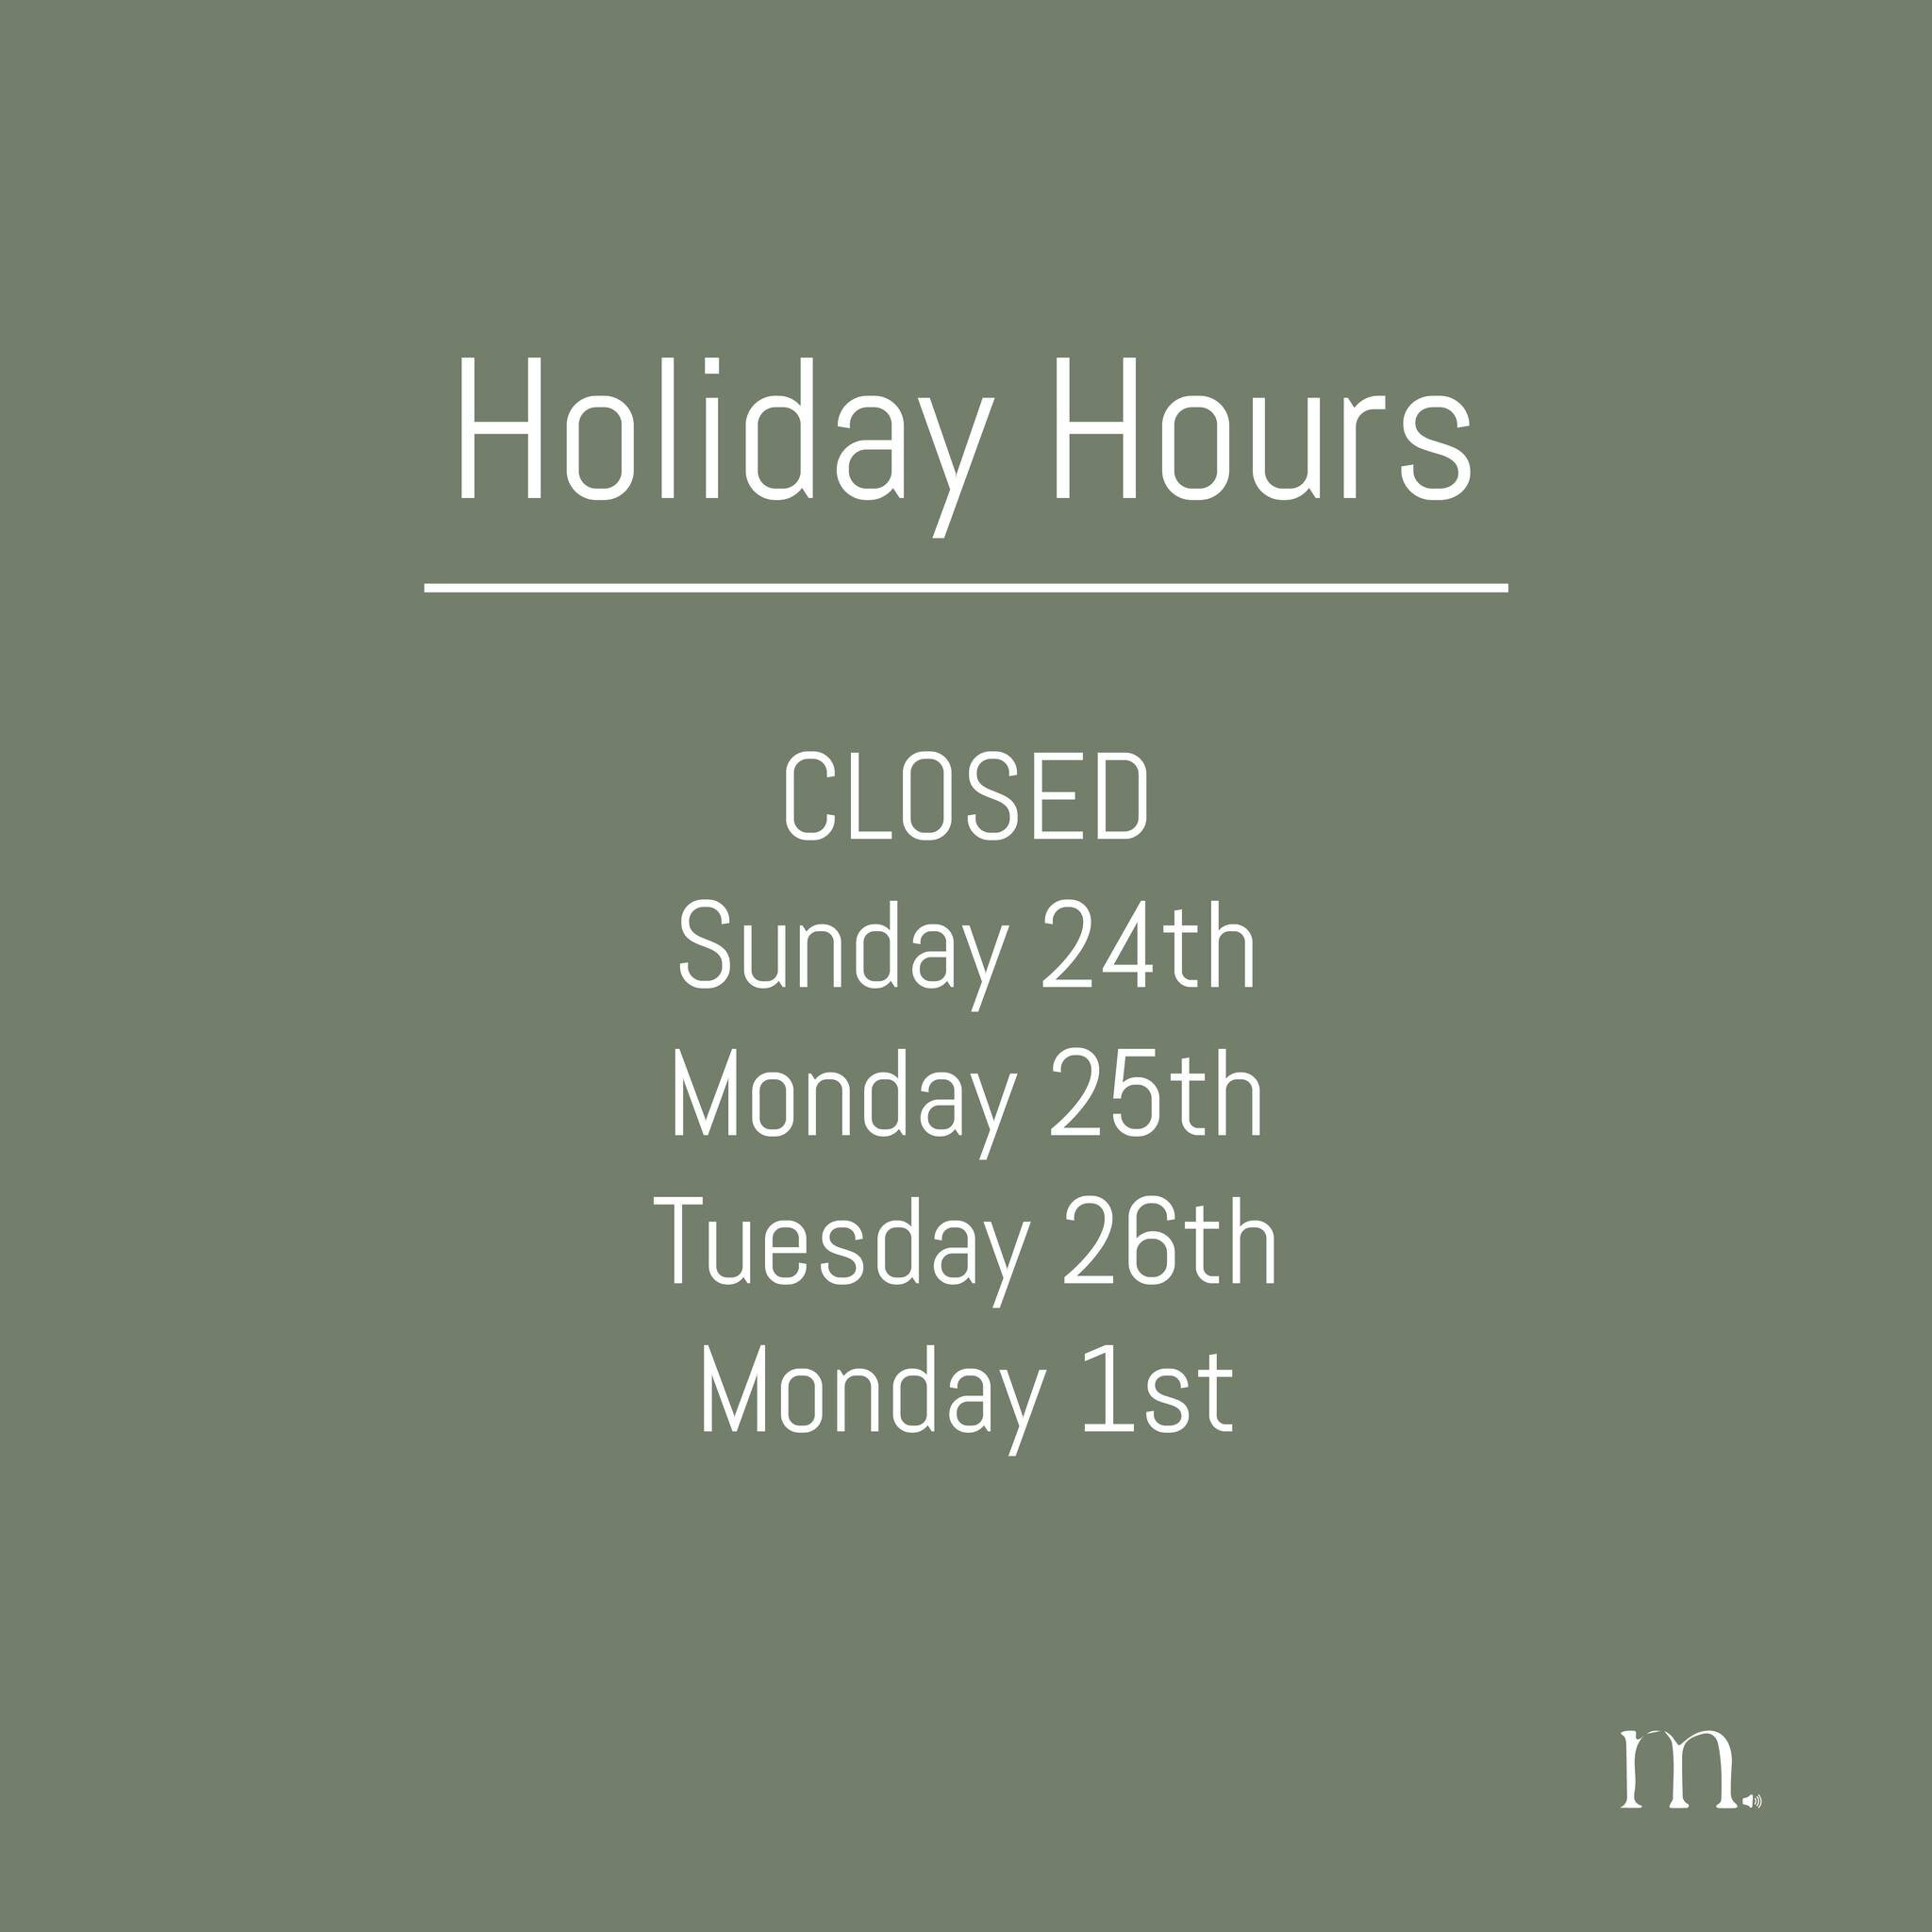 Happy Holidays from everyone at Mondegreen Cafe! 
We'll be back serving up food and coffee from Wednesday 27th December. 

 #mondegreencafe #Brunch #smallbusiness #cafe #lunch #ballaratbusiness #Smallbusiness #Cafe #brunch